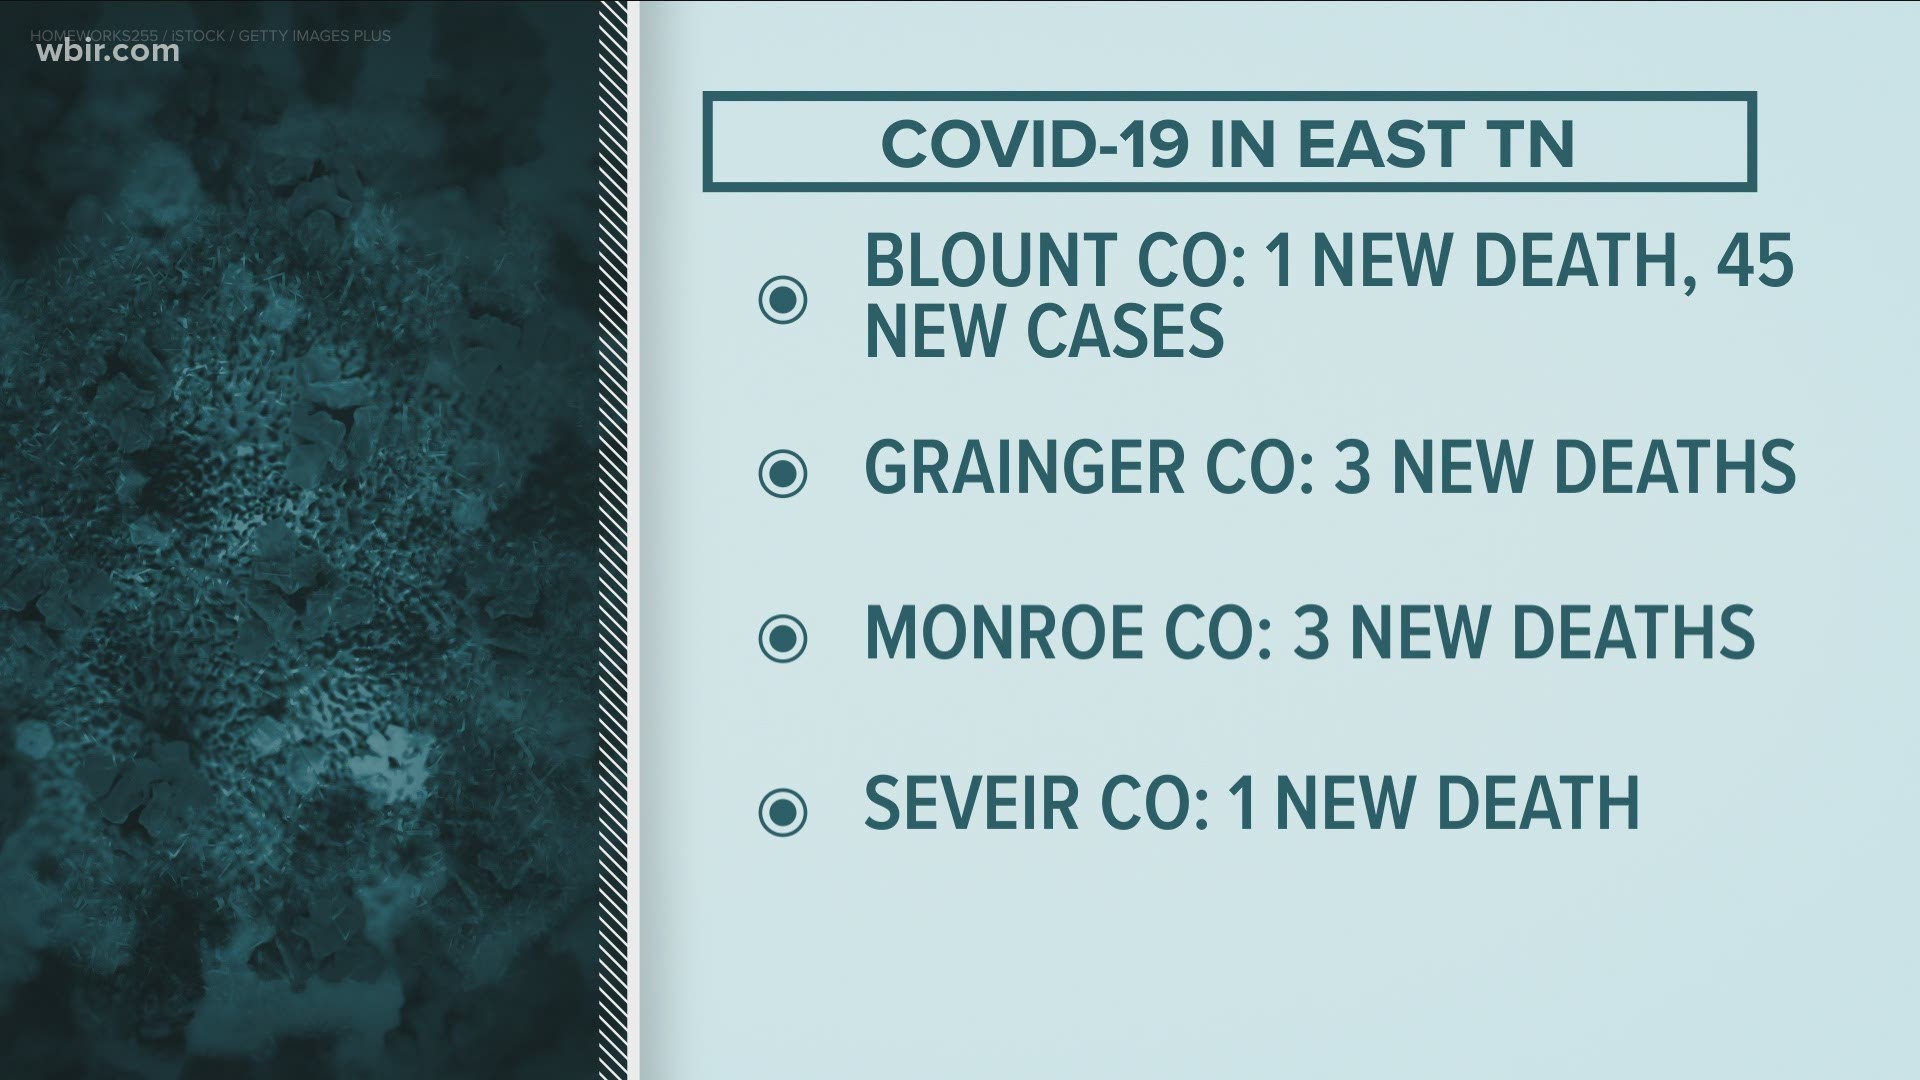 Knox County is seeing persistent, high COVID-19 case counts and hospitalizations. Other area counties continue to see deaths from the virus.